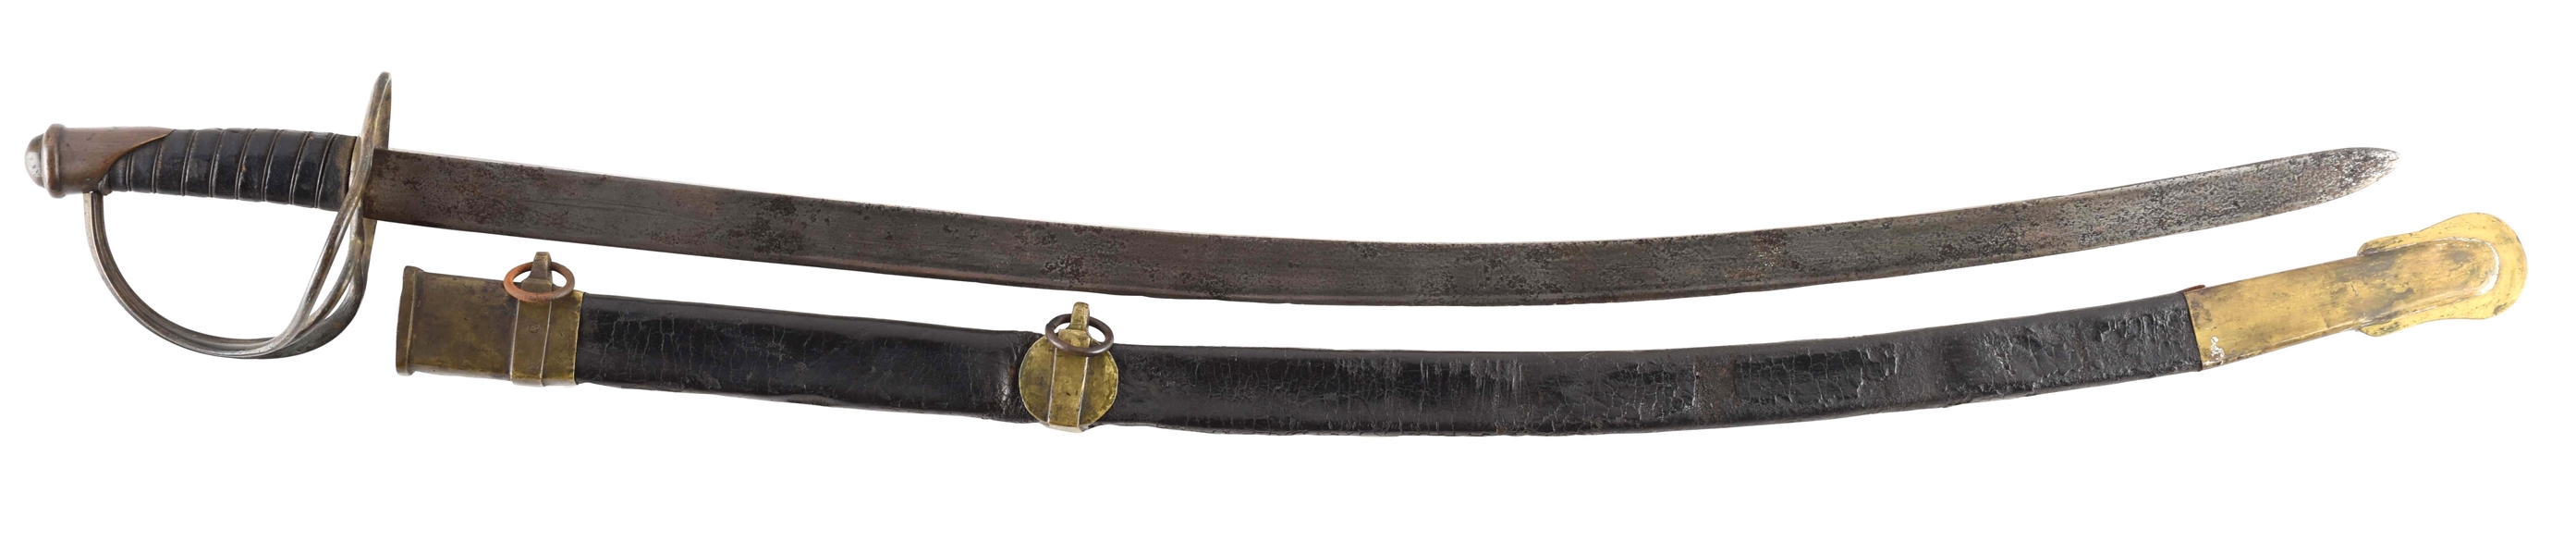 UNMARKED CONFEDERATE CIVIL WAR CAVALRY SABER ATTRIBUTED TO BOYLE & GAMBLE.